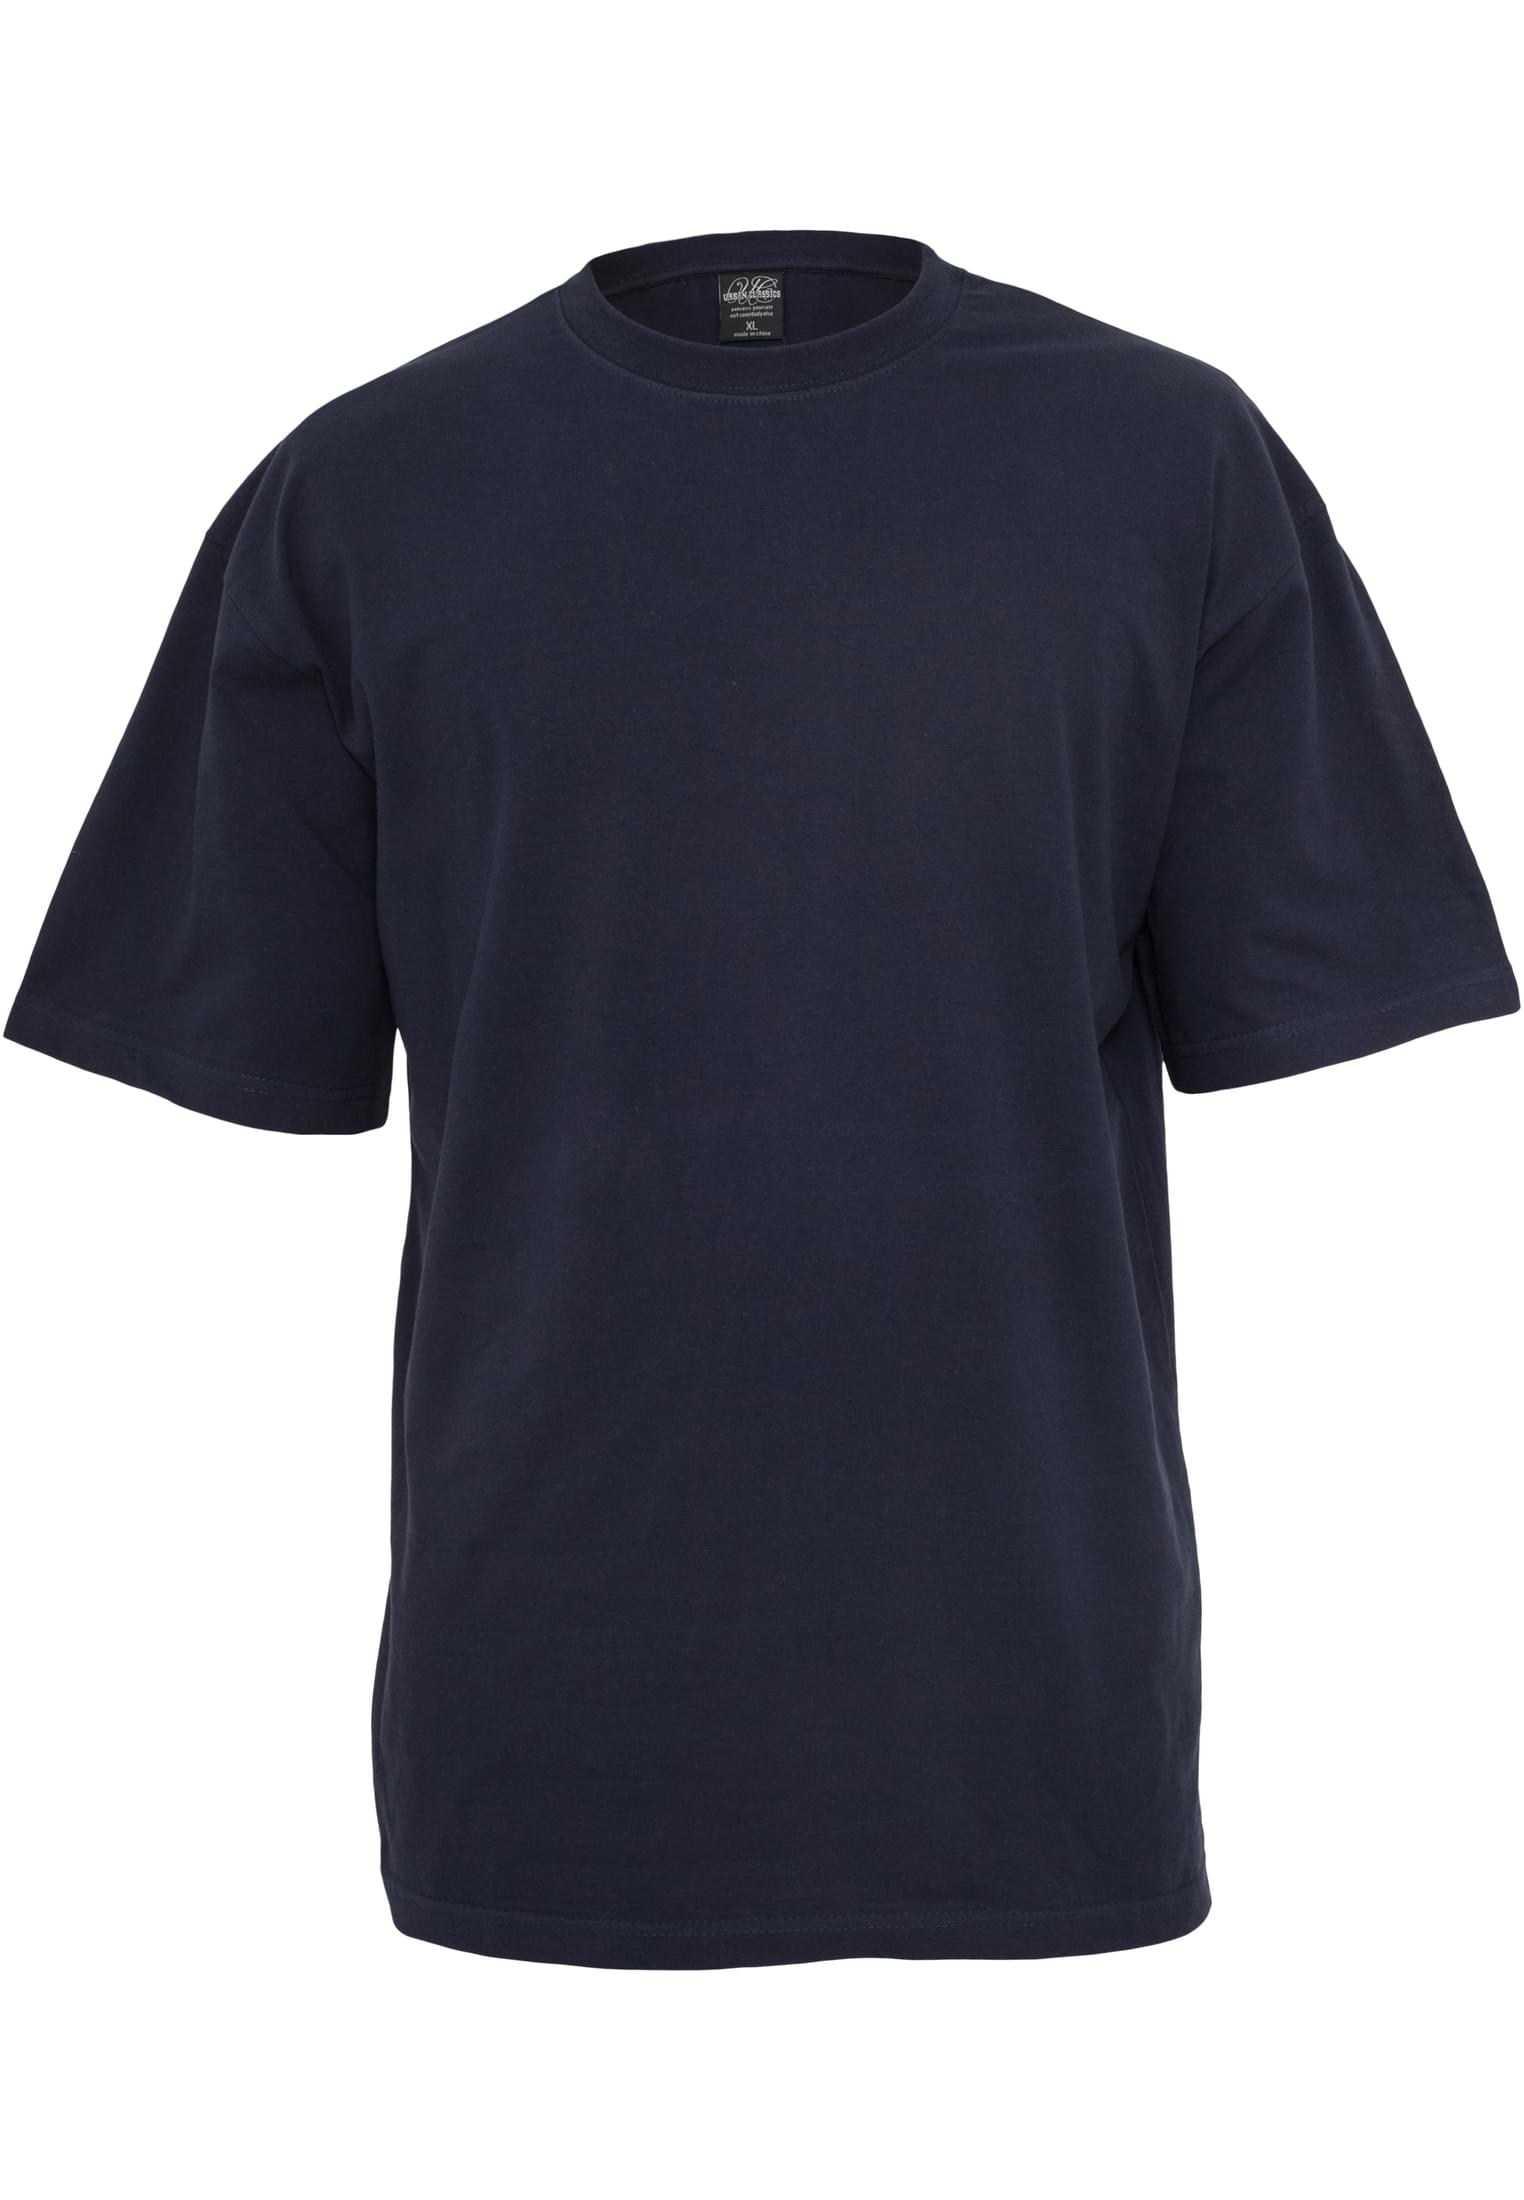 Plus Size Tall Tee in Farbe navy